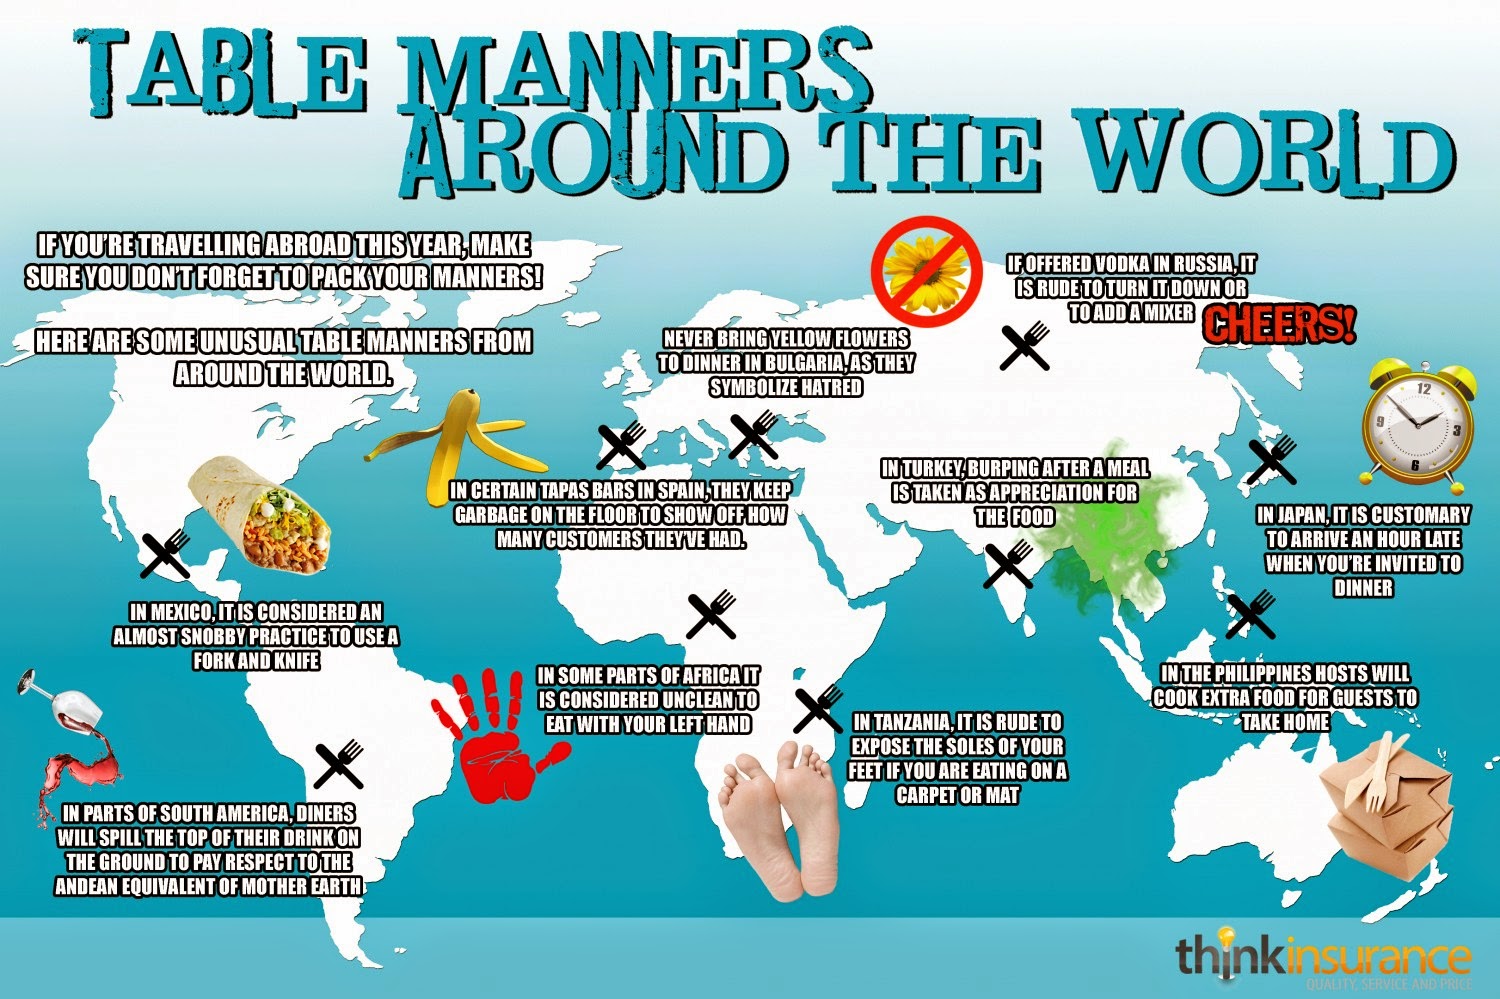 Country differences. Manners around the World. Table manners in different Countries. Good manners around the World. Table manners around.